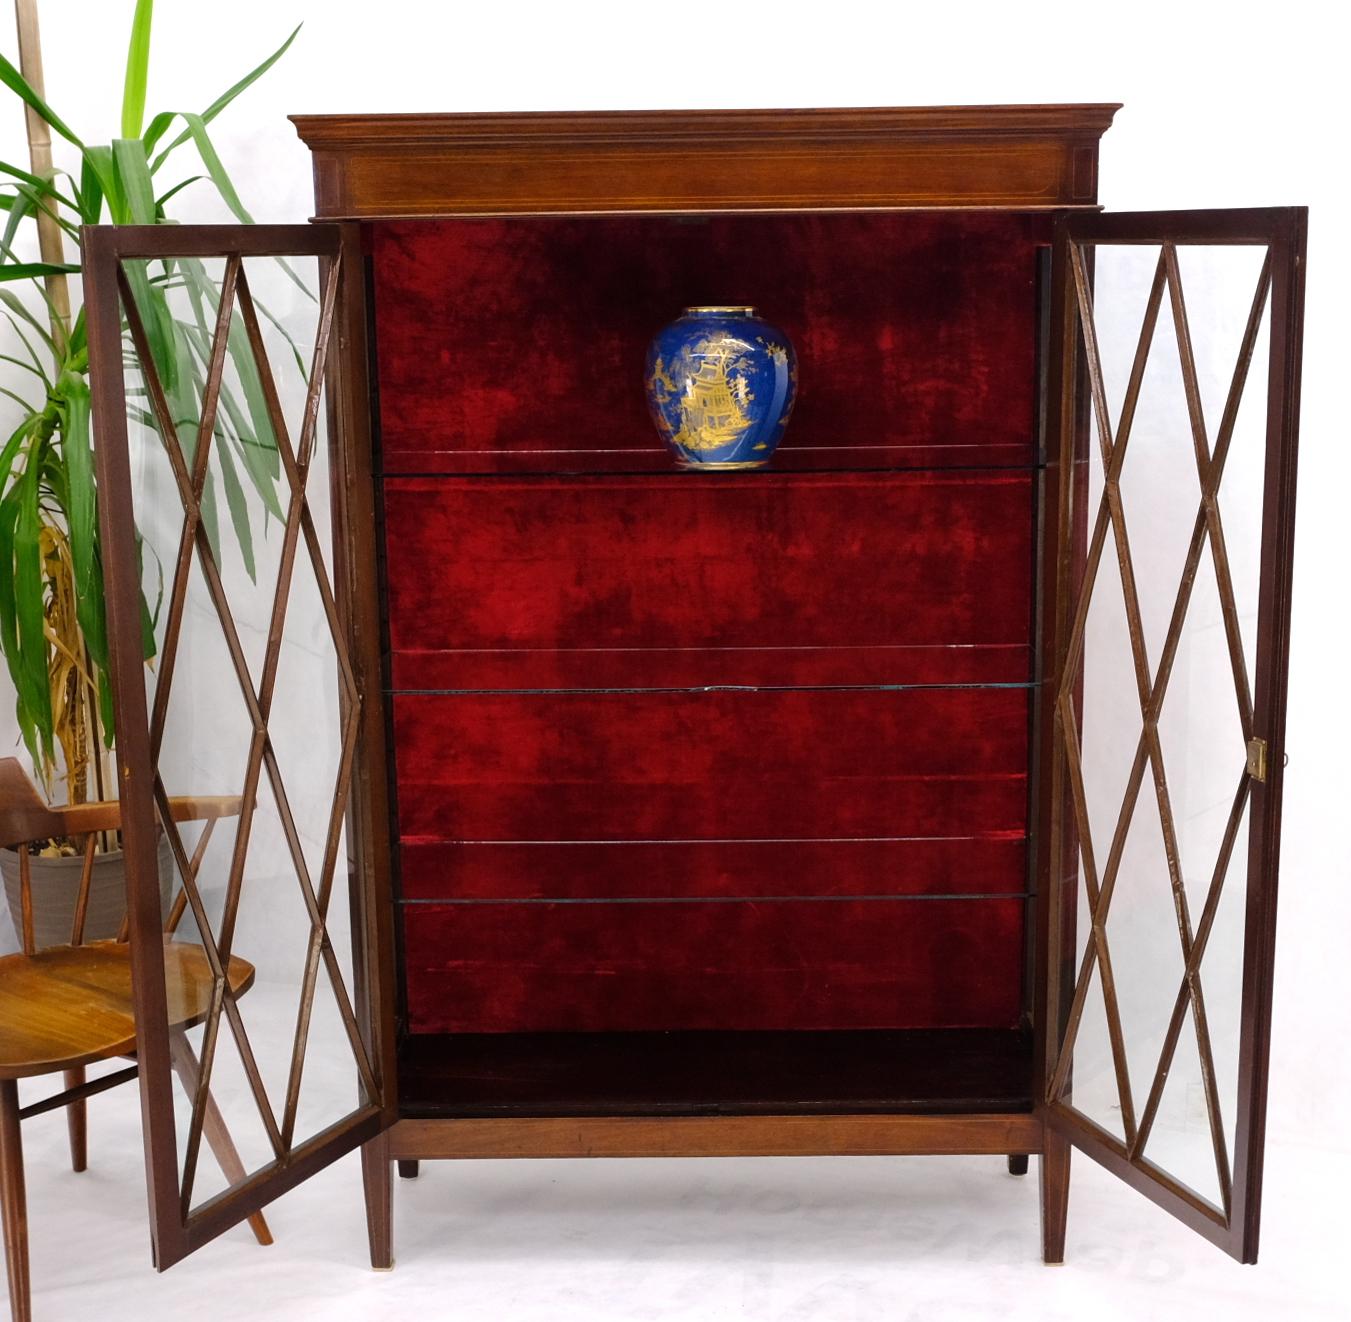 Individual Glass Pane Double Doors Pencil Inlay Flame Mahogany Show Case For Sale 1